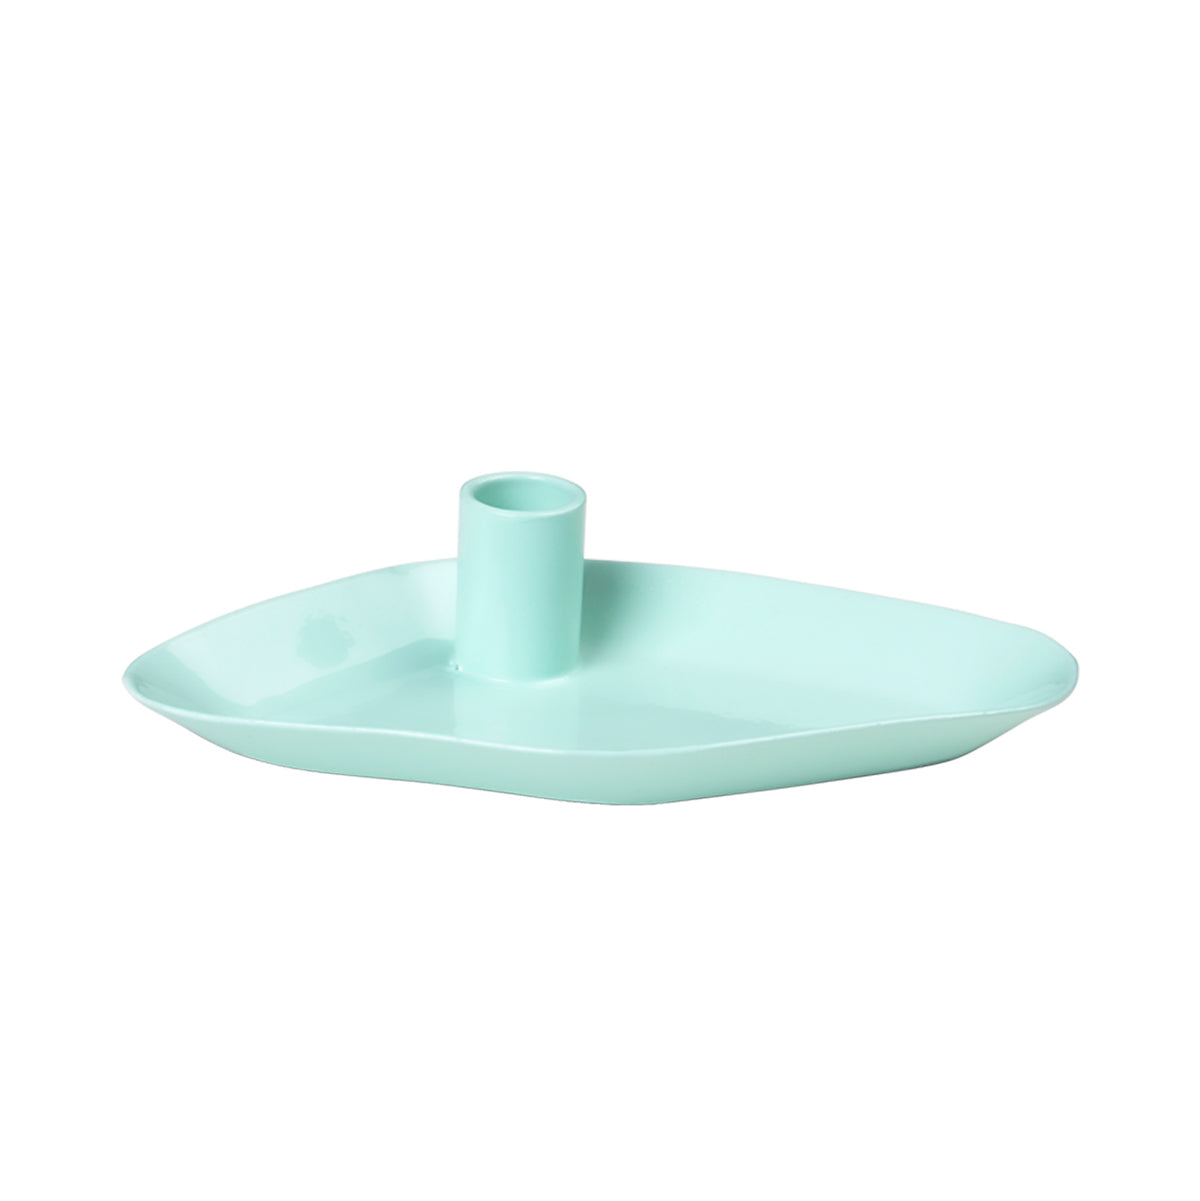 Mie Mini Candle Holder - Light Turquoise